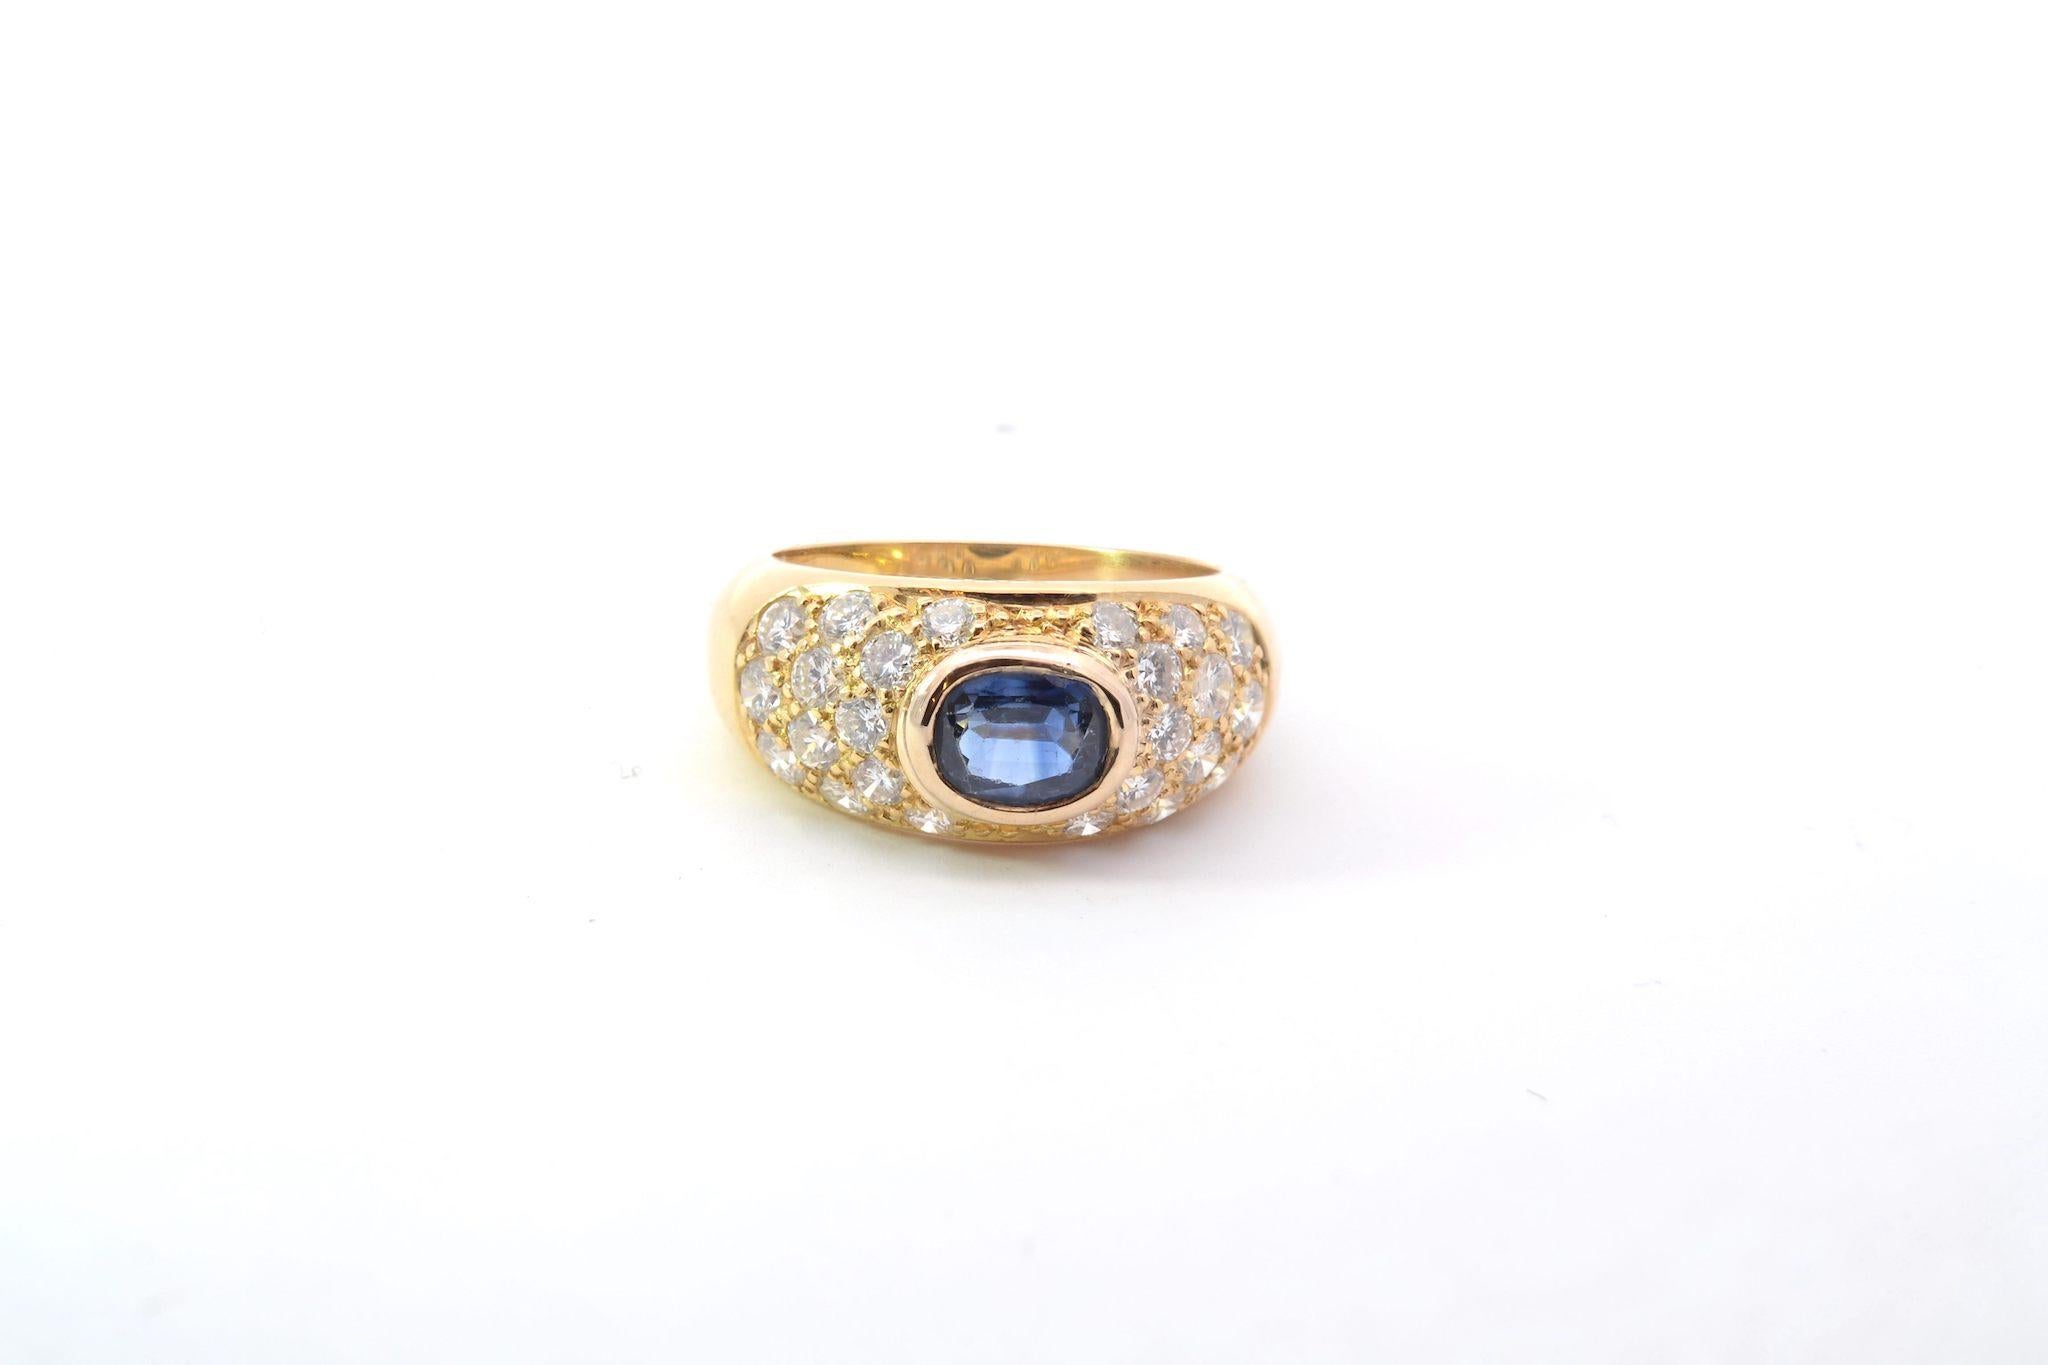 Stones: 24 diamonds: 1.70cts, sapphire: 1.20cts
Material: 18k yellow gold
Dimensions: 1cm wide
Weight: 6.9g
Period: 1980
Size: 53 (free sizing)
Certificate
Ref. : 25215